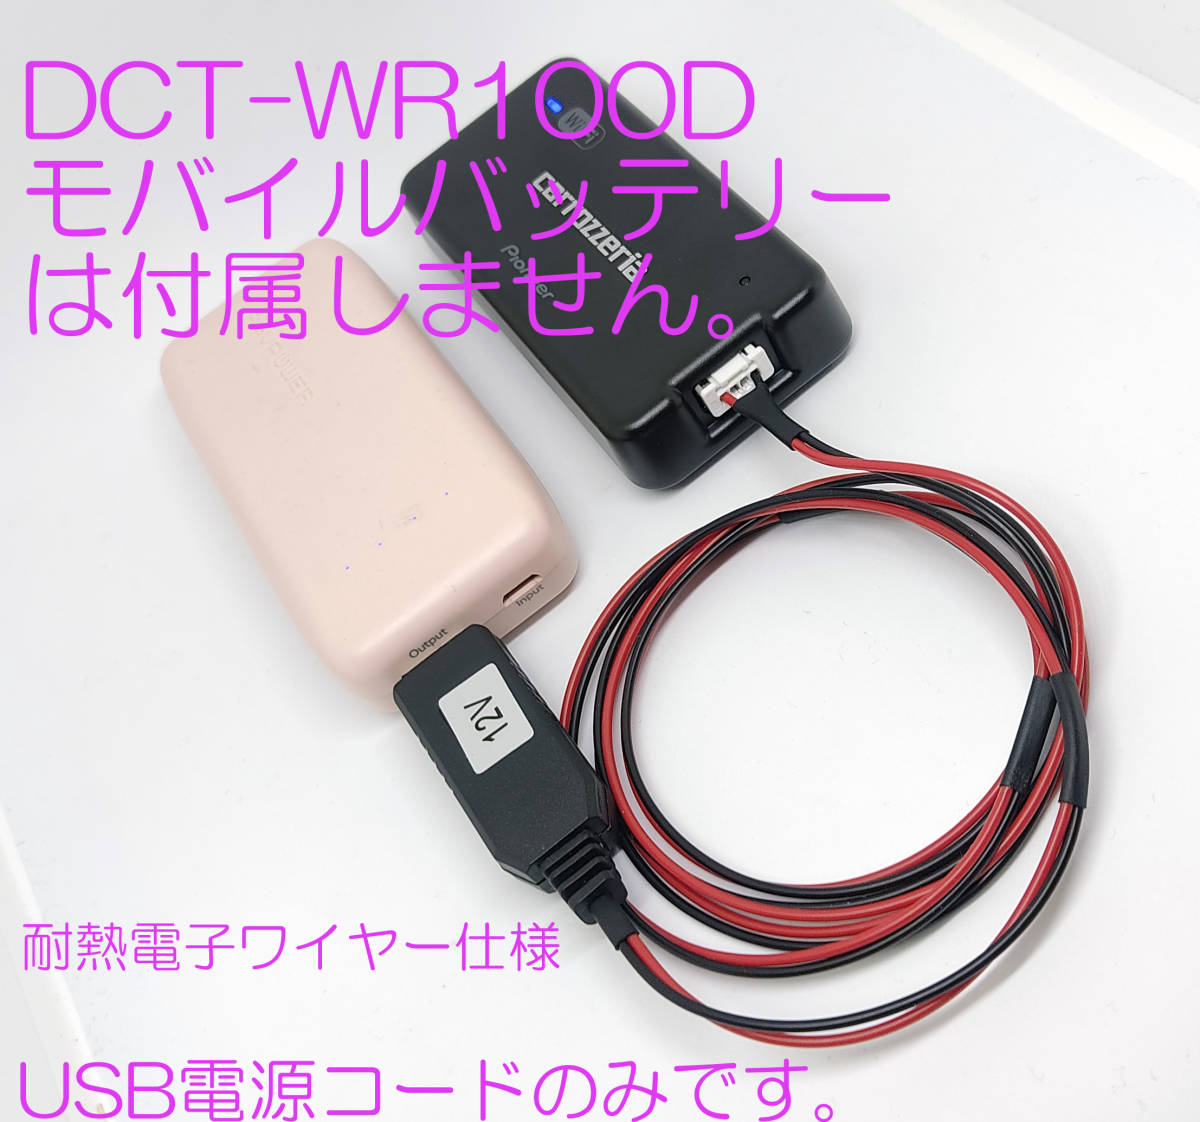 carrozzeria in-vehicle Wi-Fi router DCT-WR100D for USB power supply cable heat-resisting wiring specification original same etc. parts ( connector ) mobile battery . drive possibility .